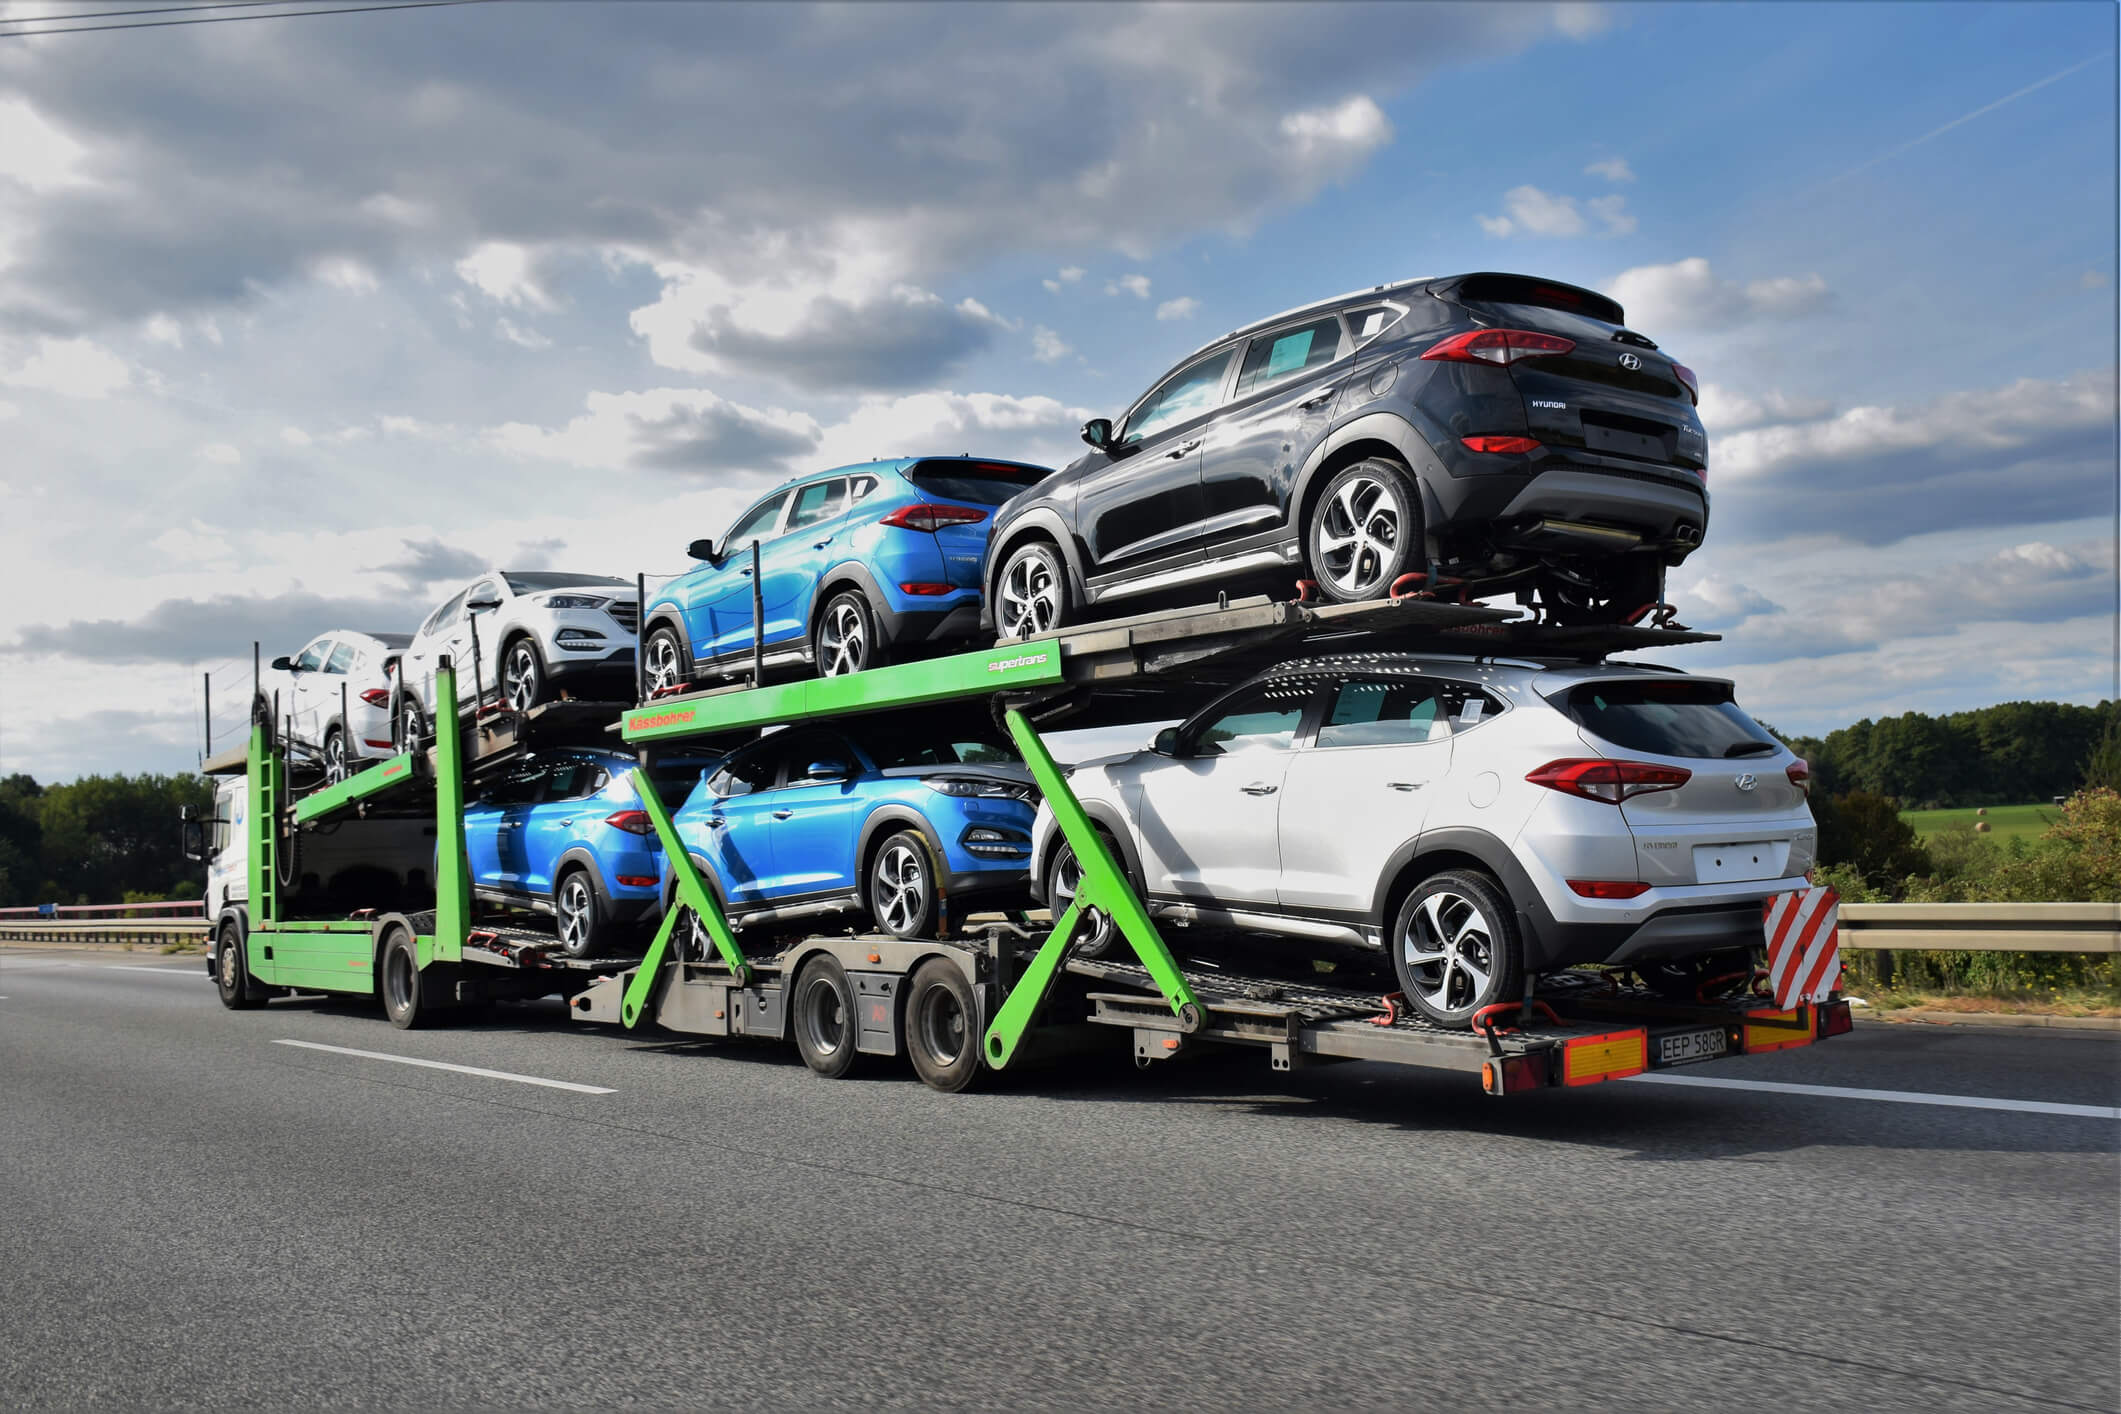 Car Shipping Cost – How Much Does It Cost to Ship a Car?